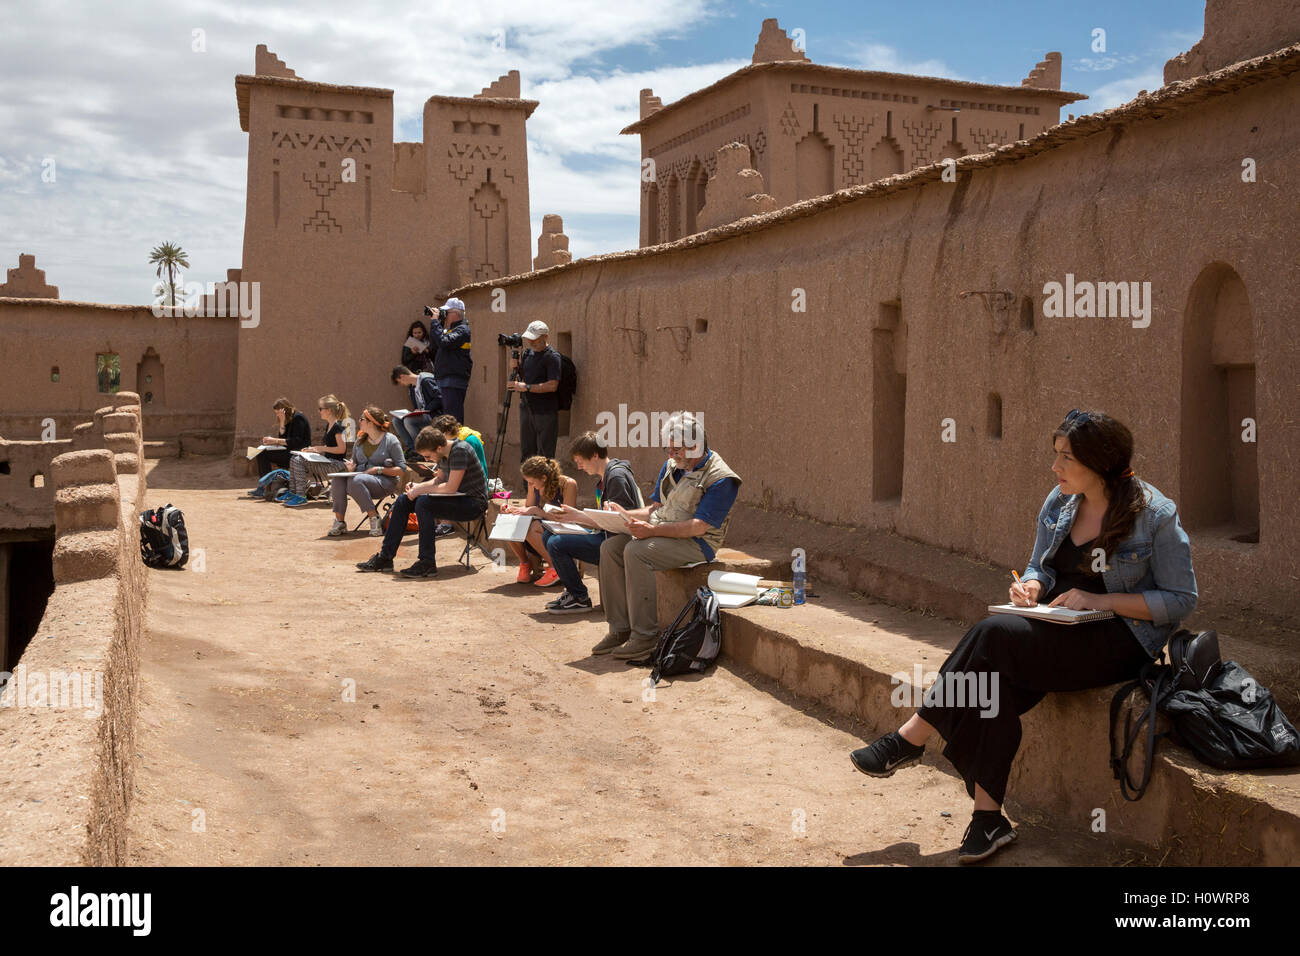 Kasbah Ameridhil, near Skoura, Morocco.  Art Students and Photographers Sketching Photographing Architectural Details of Kasbah. Stock Photo